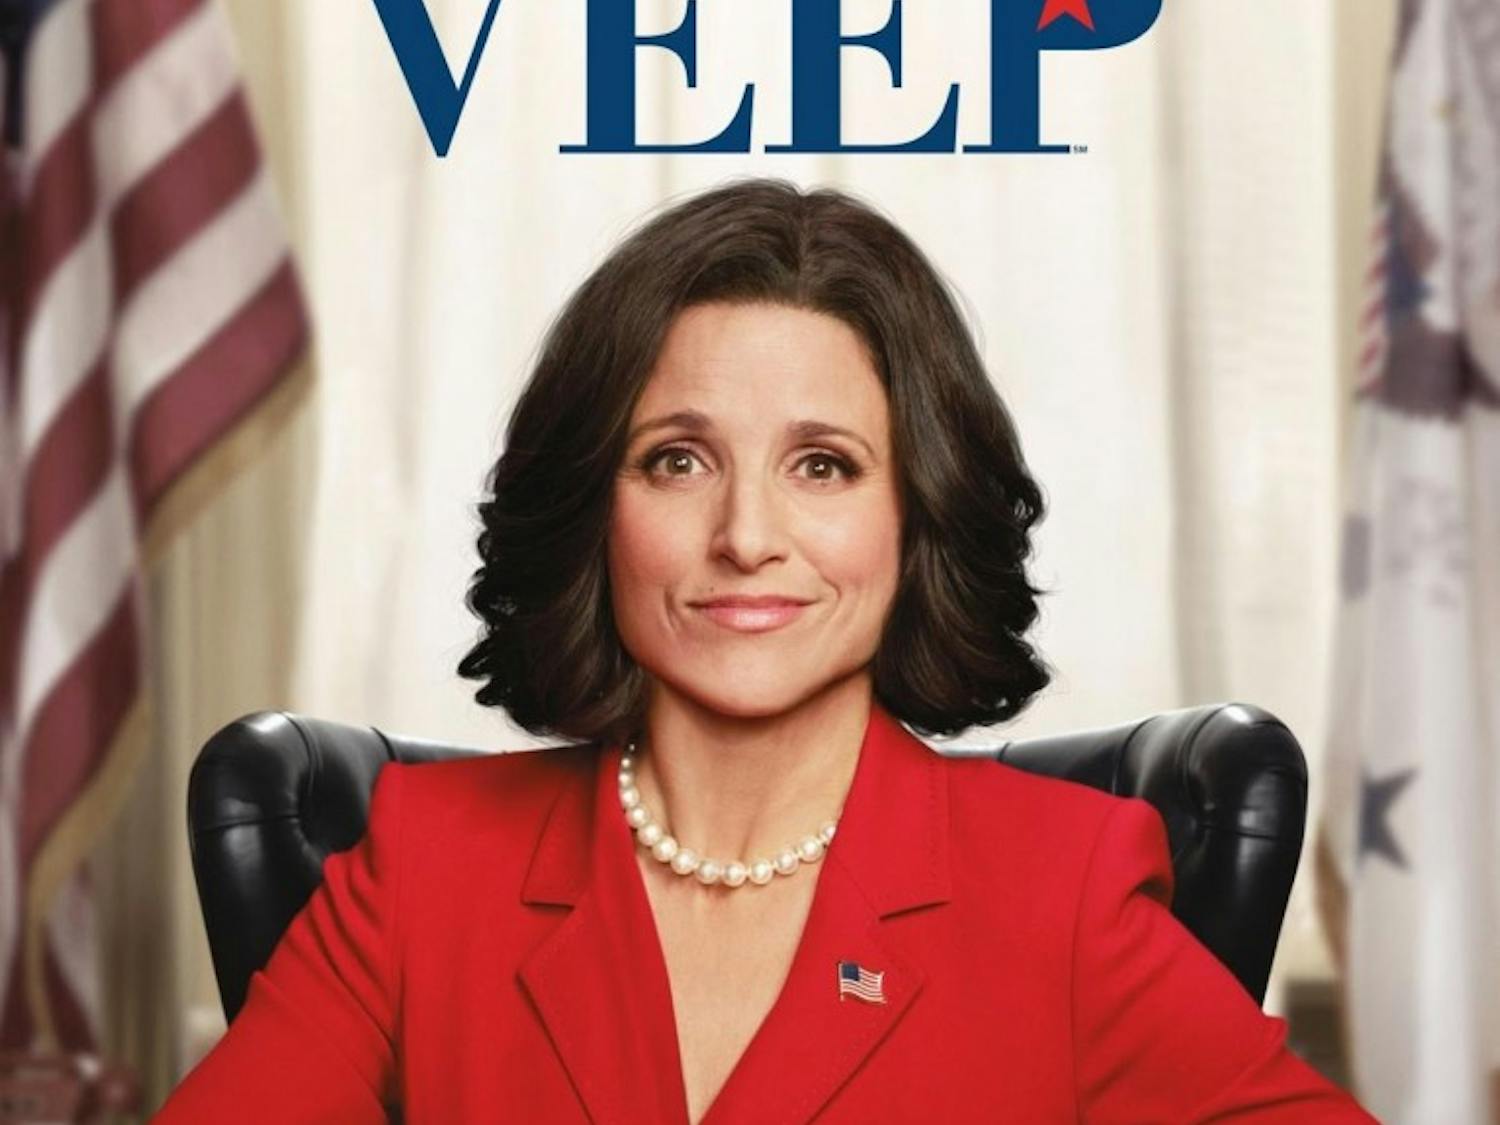 The “Veep” season premiere depicts the characters in new roles.